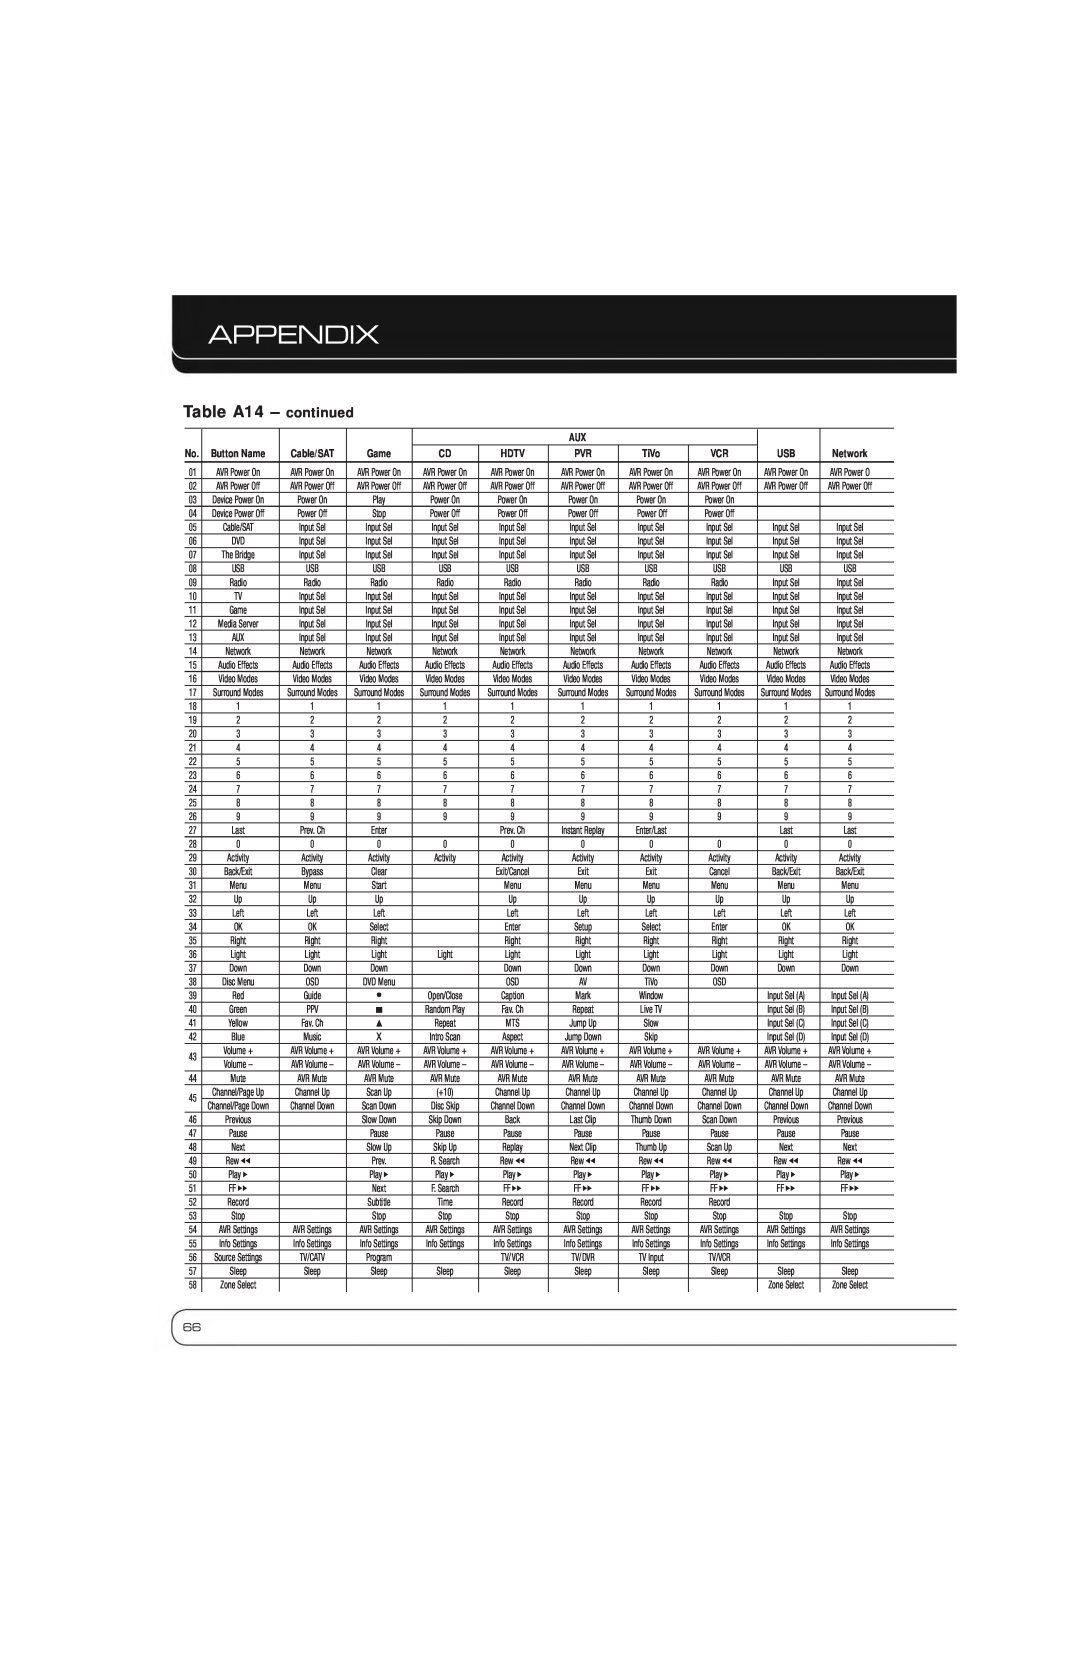 Harman-Kardon AVR 7550HD Table A14 - continued, Appendix, Power Off, Button Name, Cable/SAT, Game, Hdtv, TiVo, Network 